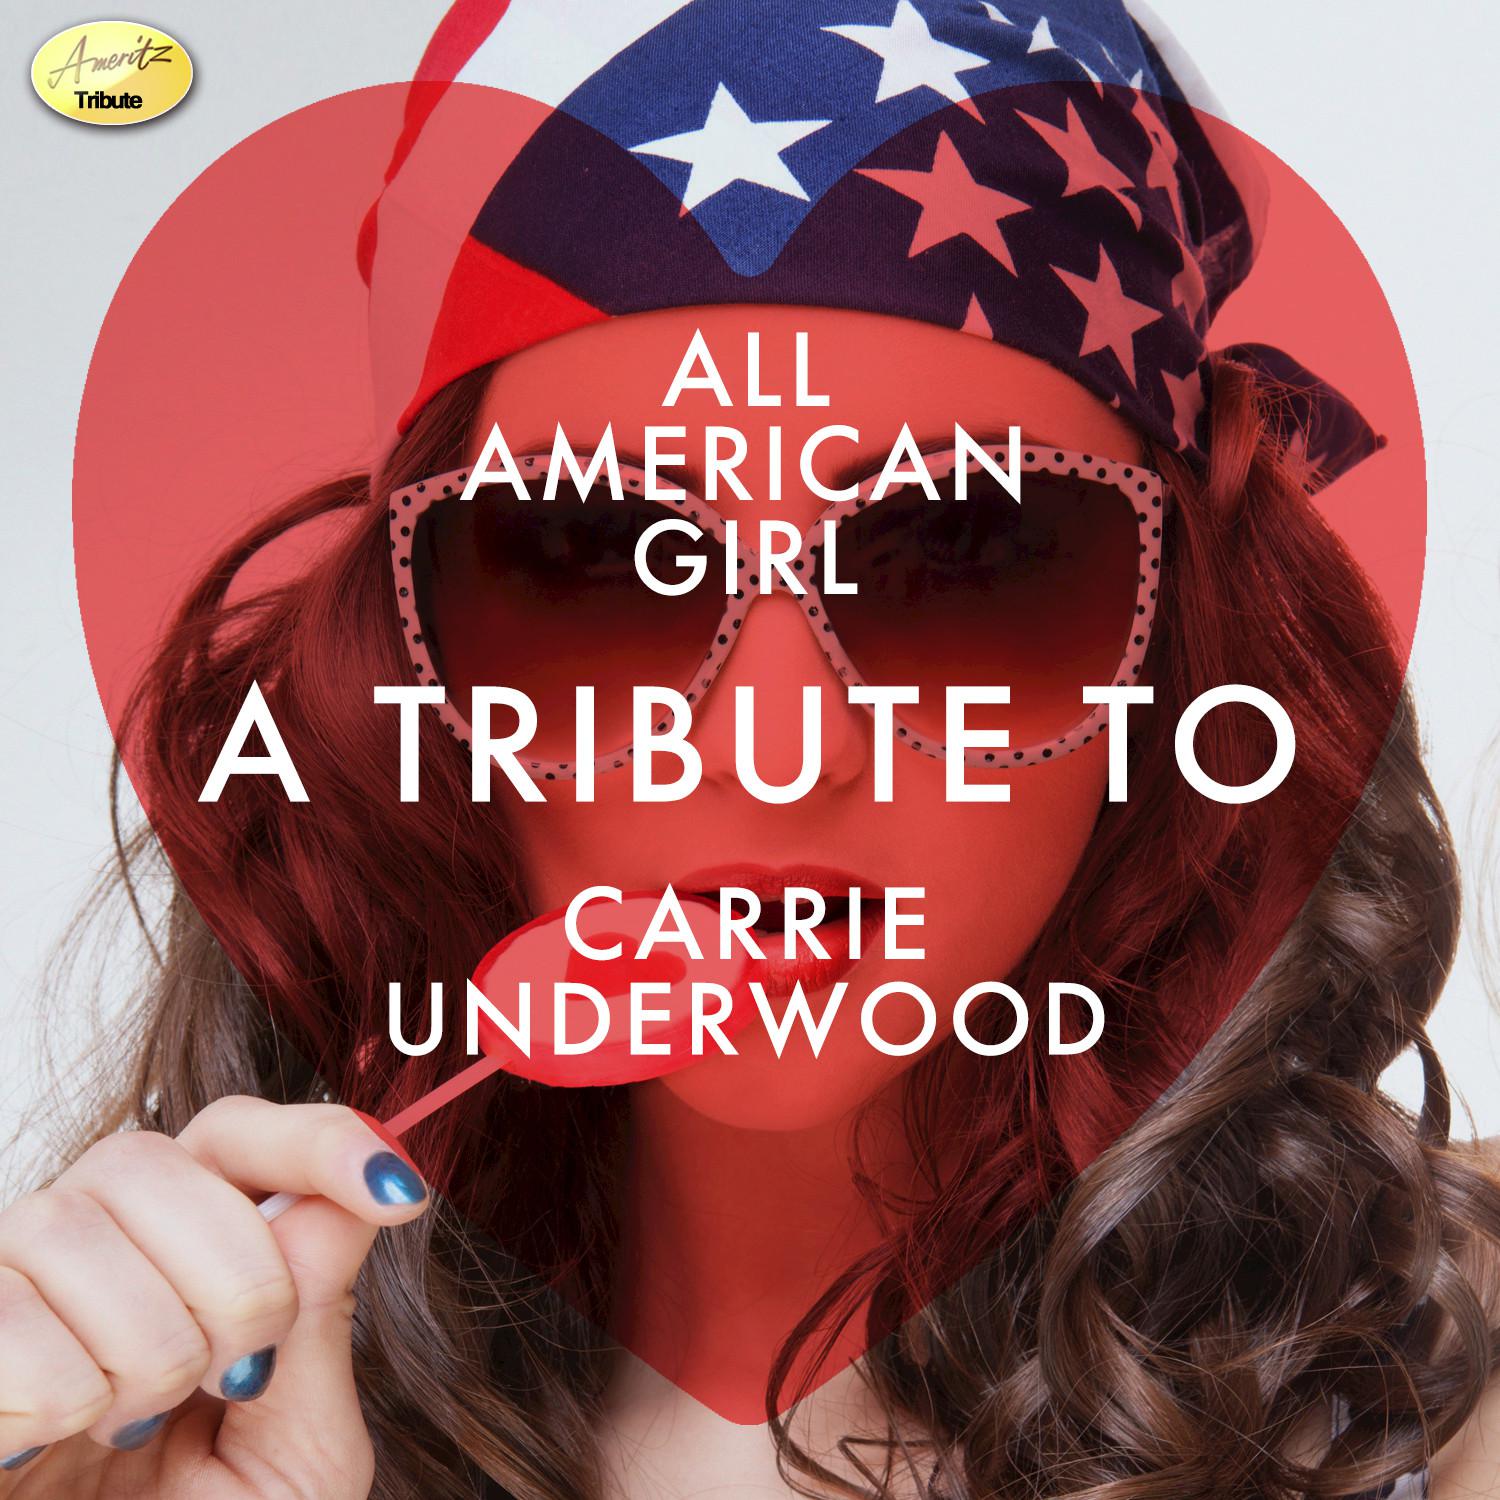 All American Girl - A Tribute to Carrie Underwood